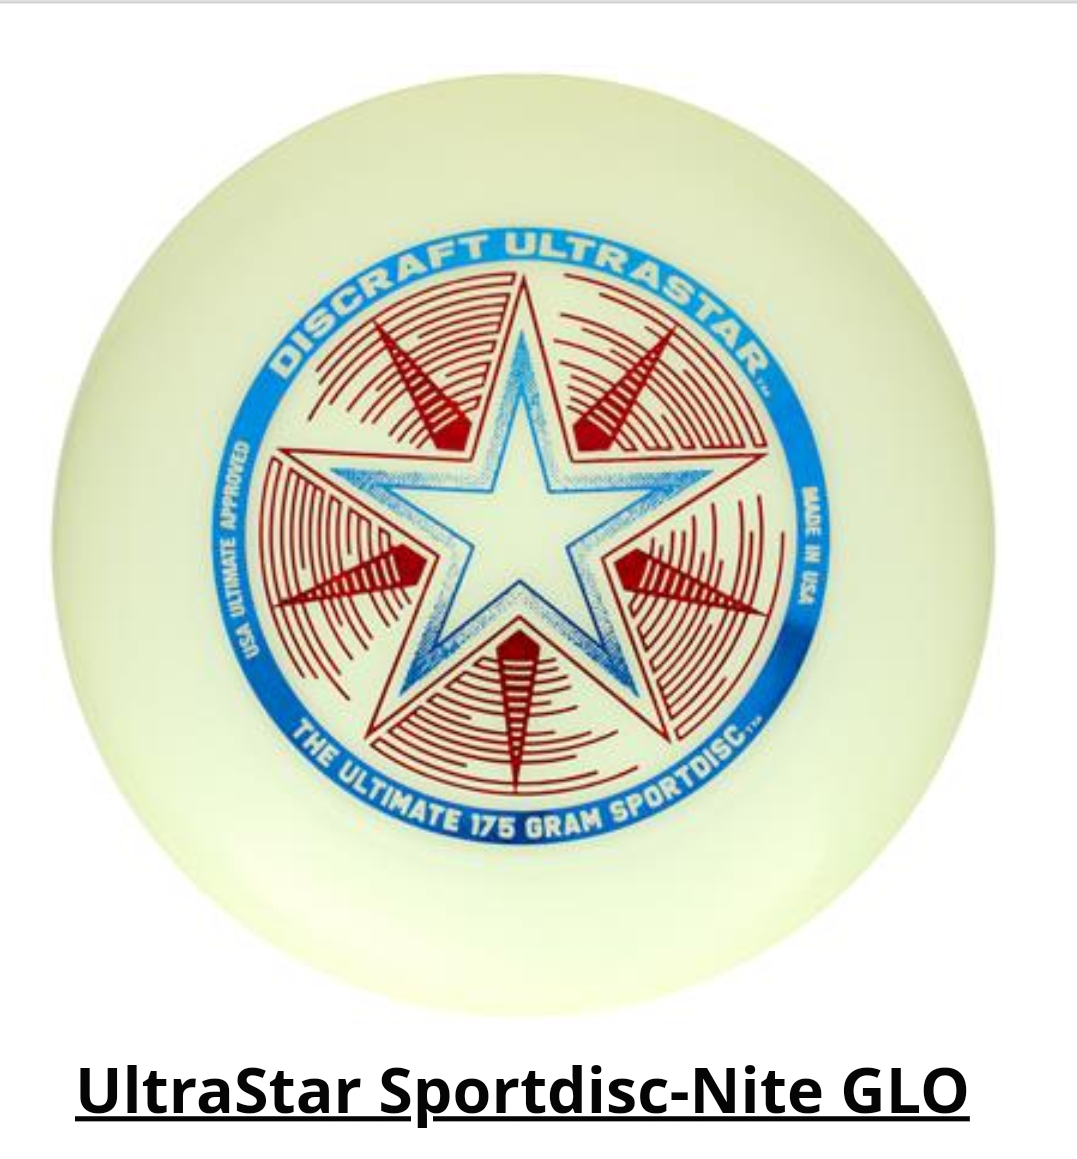 Unwind after a day's work with the Official disc of the USA Ultimate Championship Series